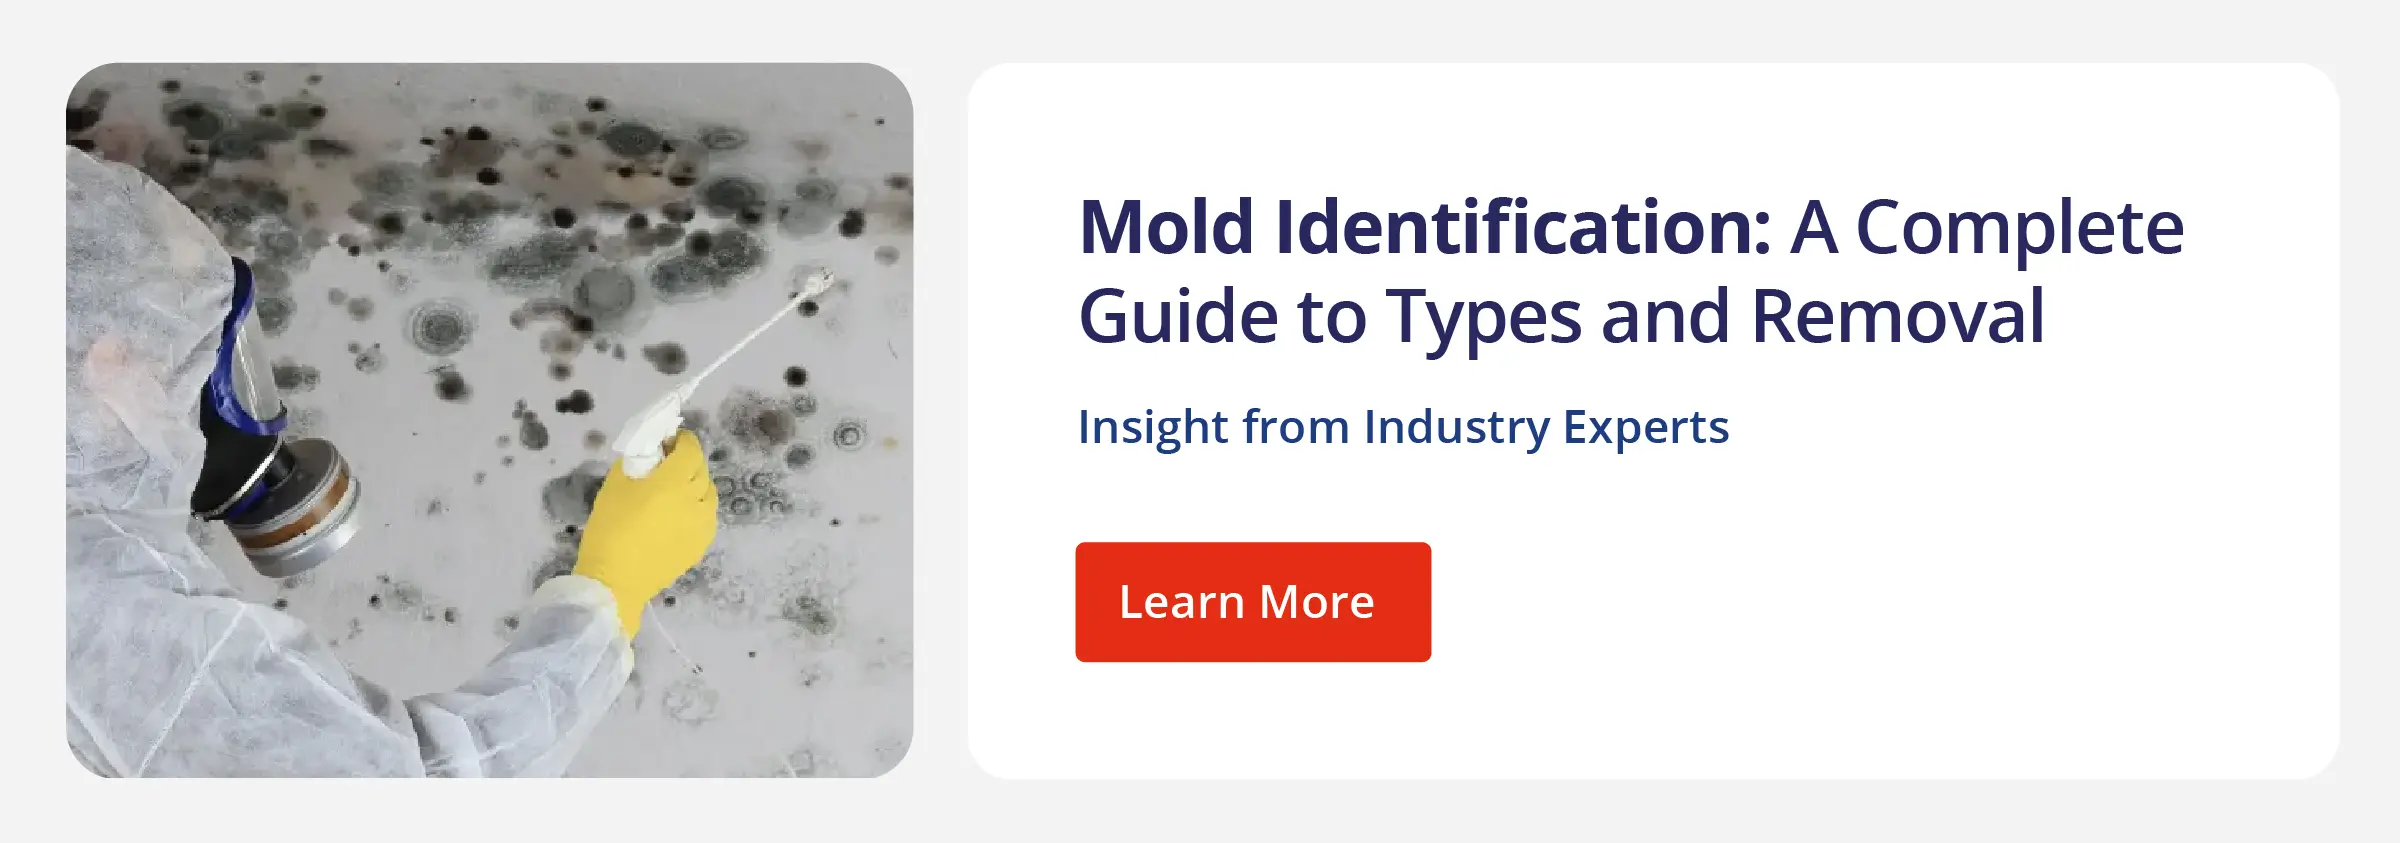 CTA for a post about mold identification with an image of a professional removing mold.